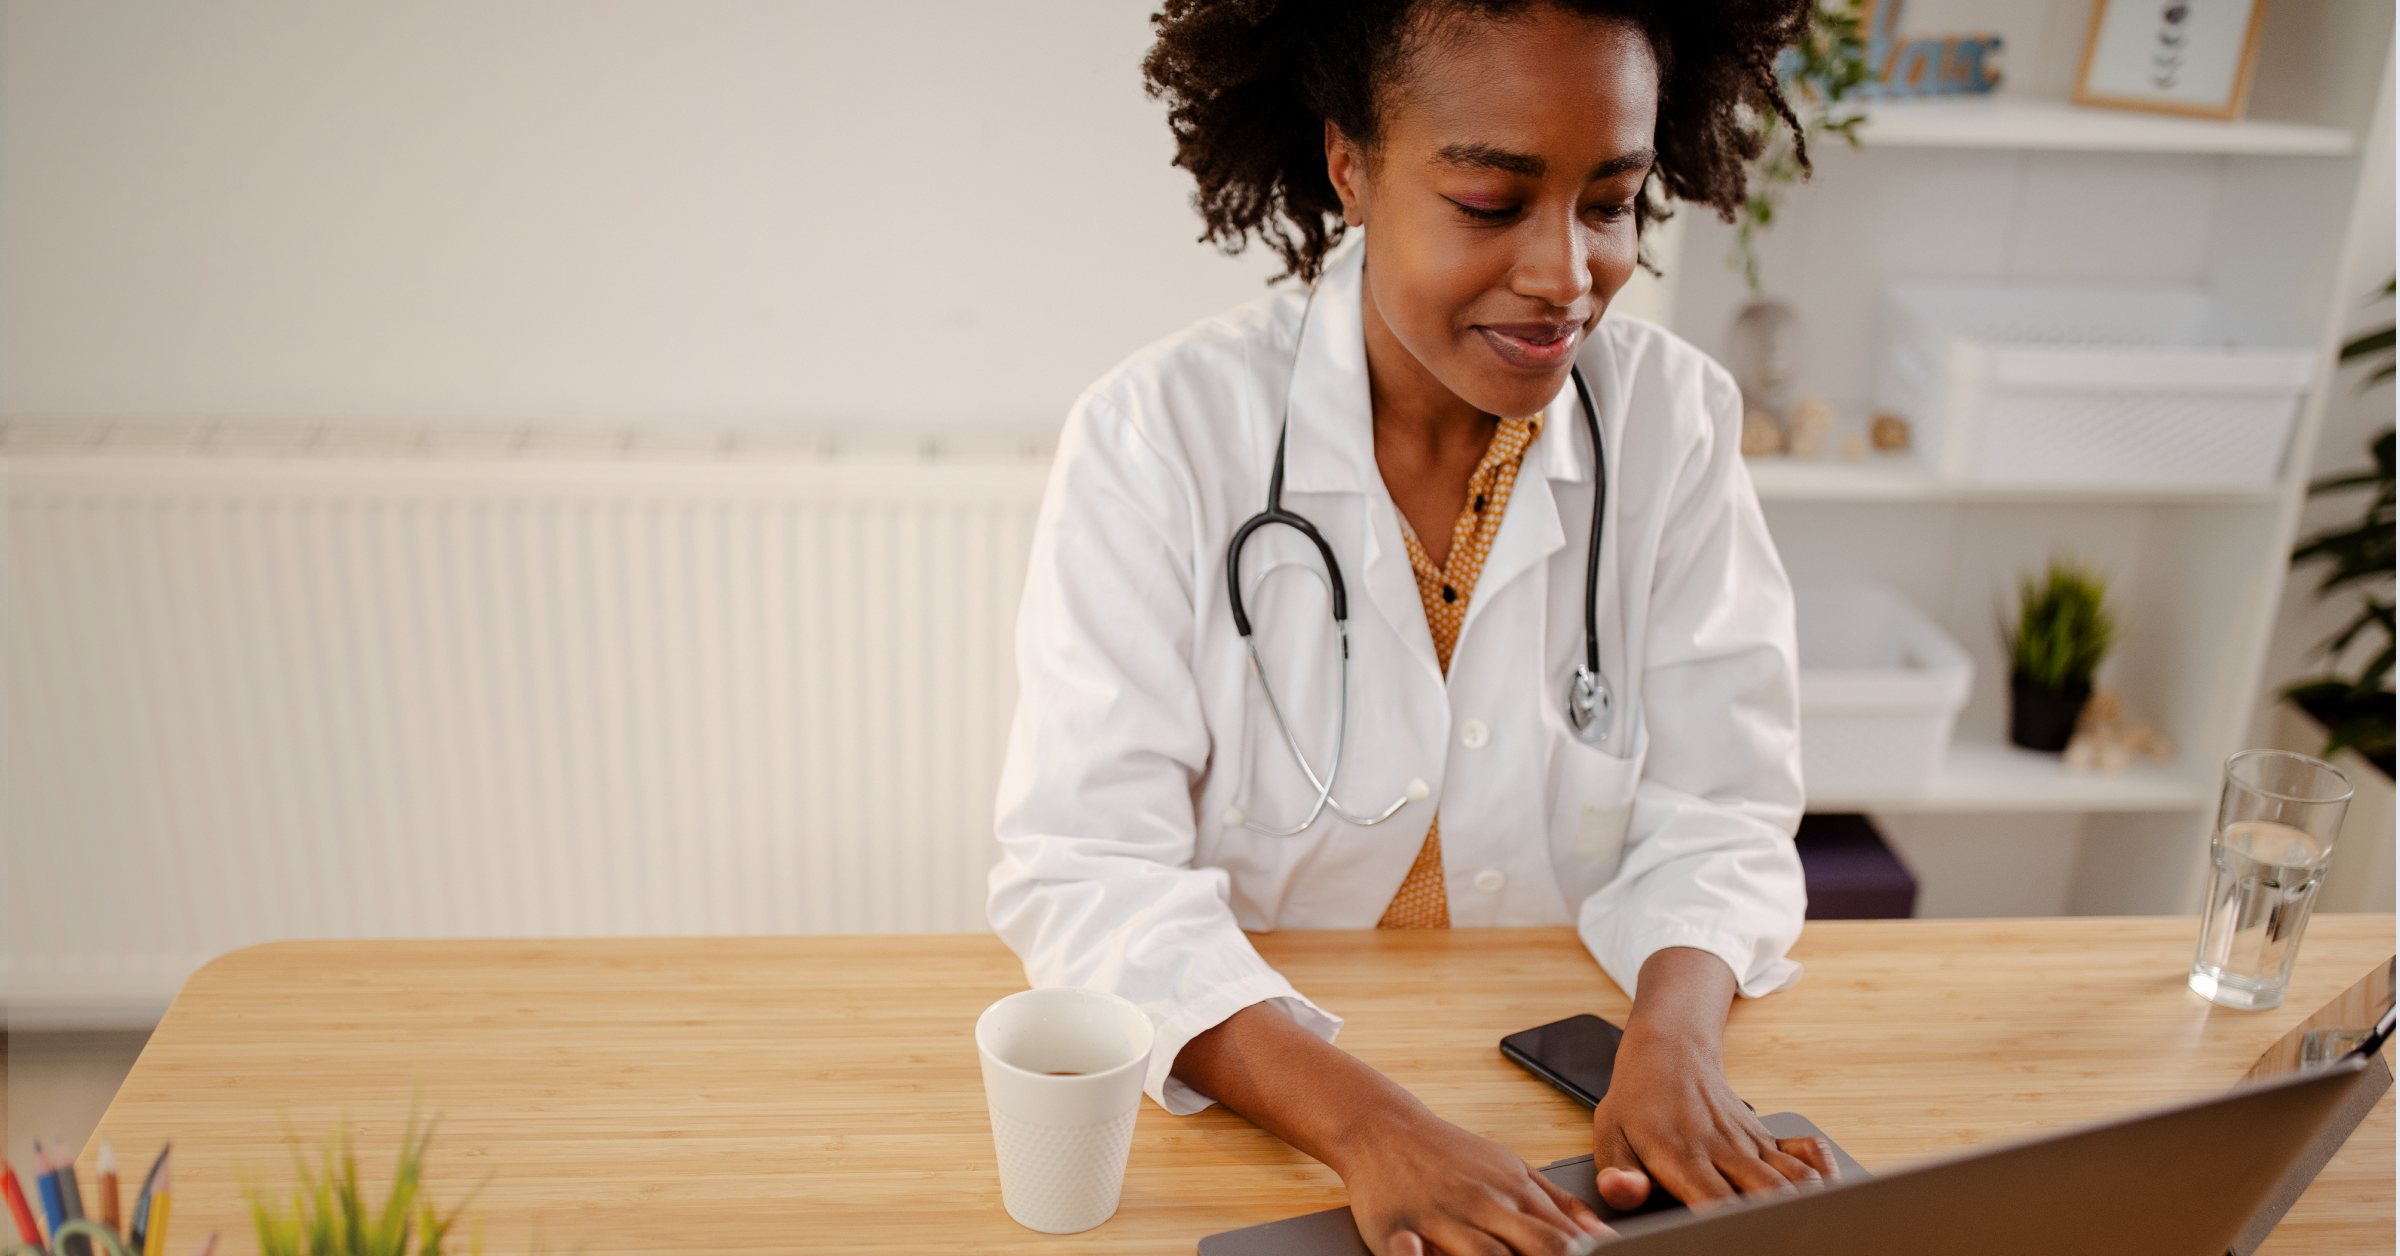 A doctor in a white coat and stethoscope types on a laptop. 